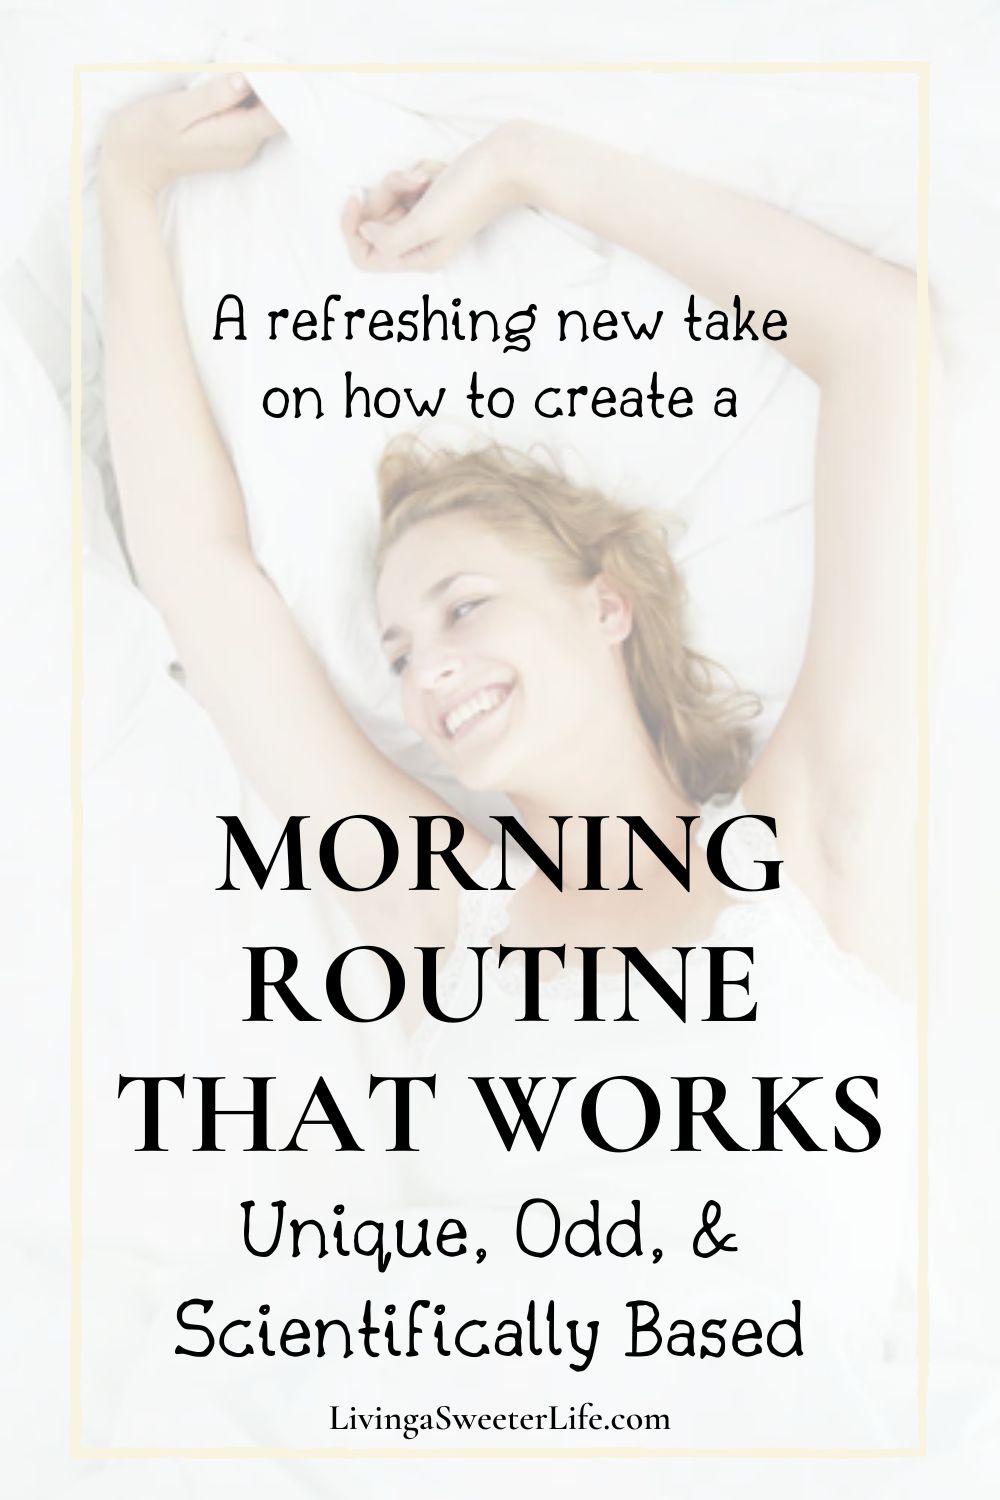 22 Unique Ideas for a Powered Up Healthy Morning Routine